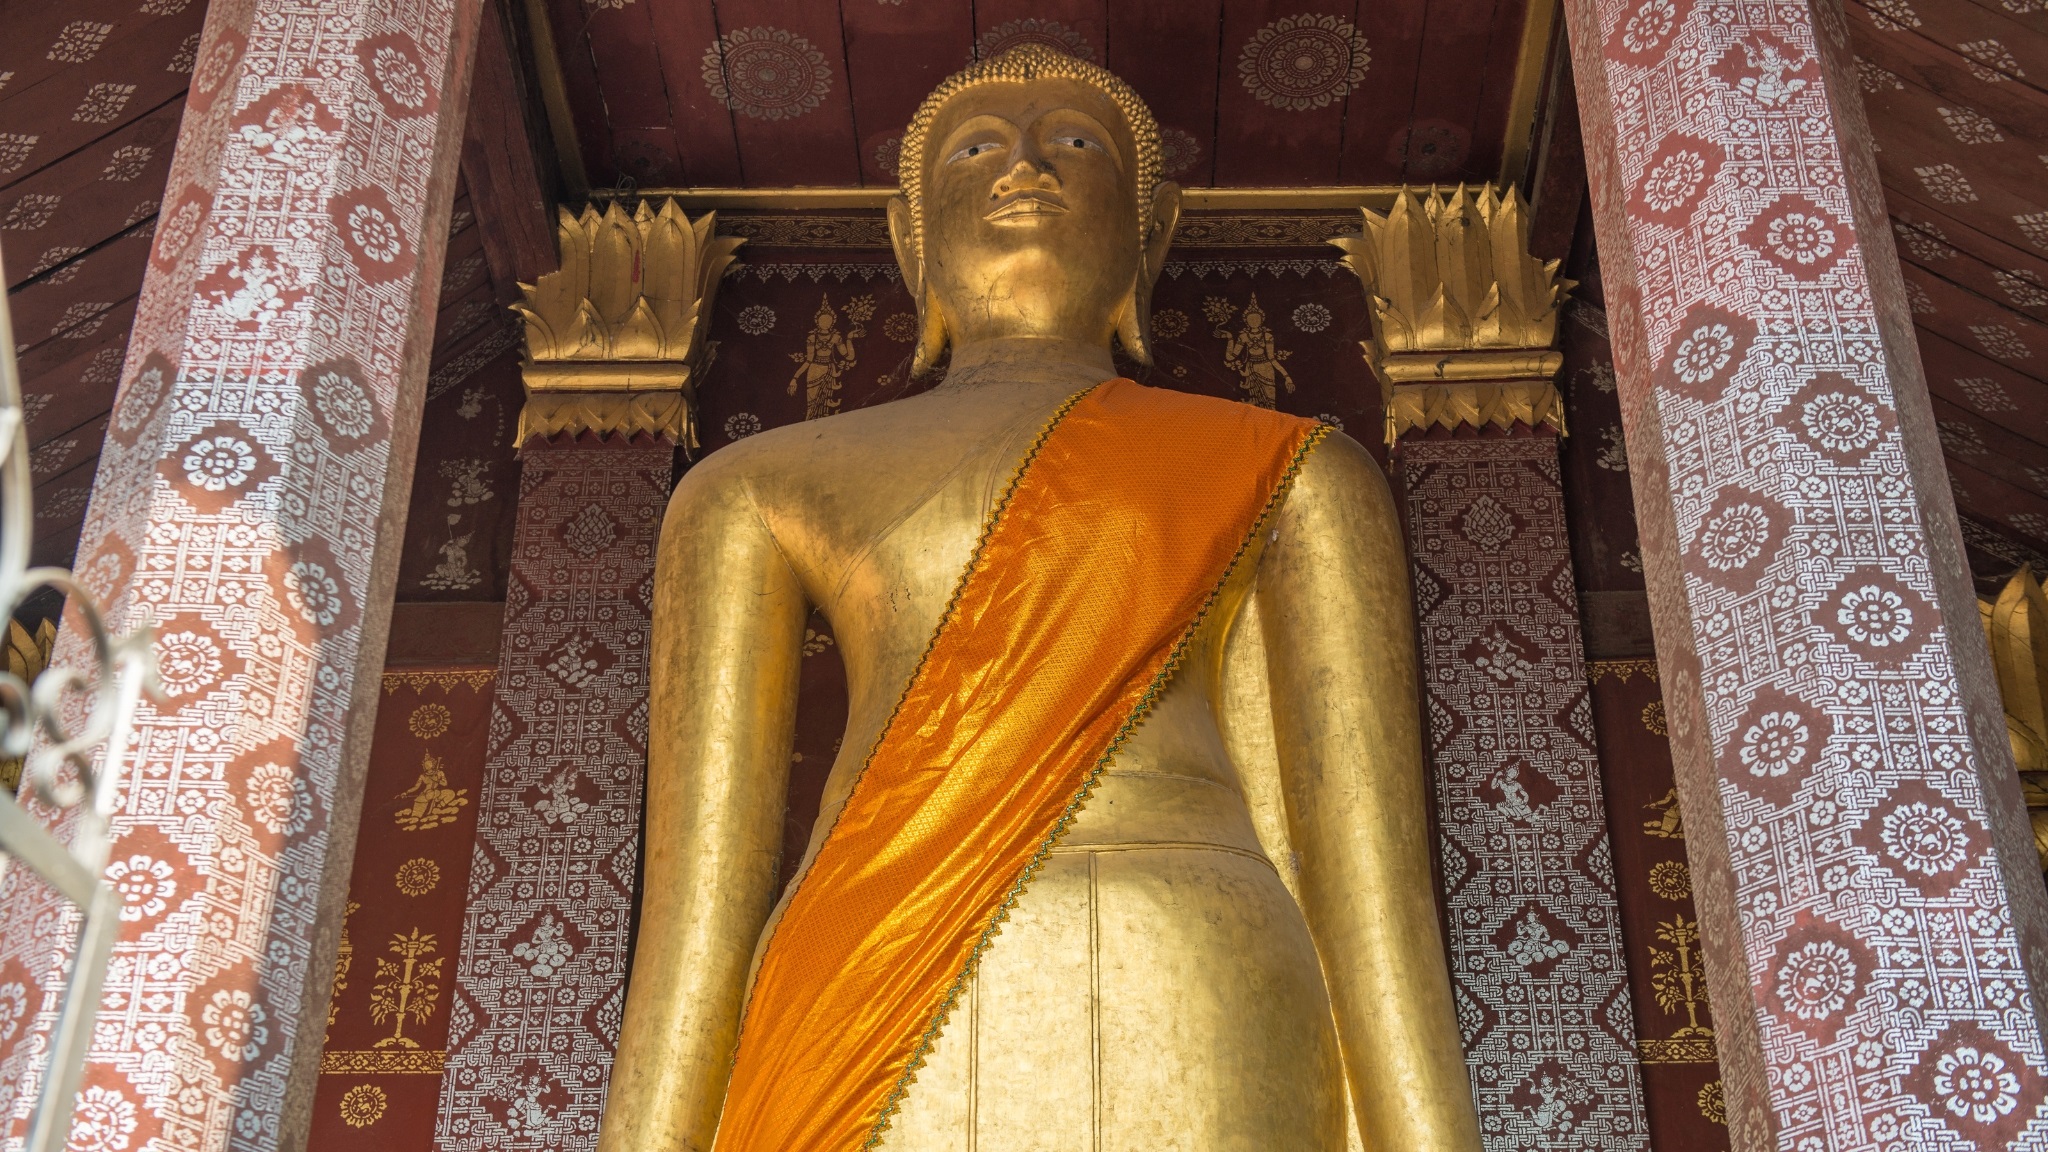 The Enormous Golden Buddha Statue